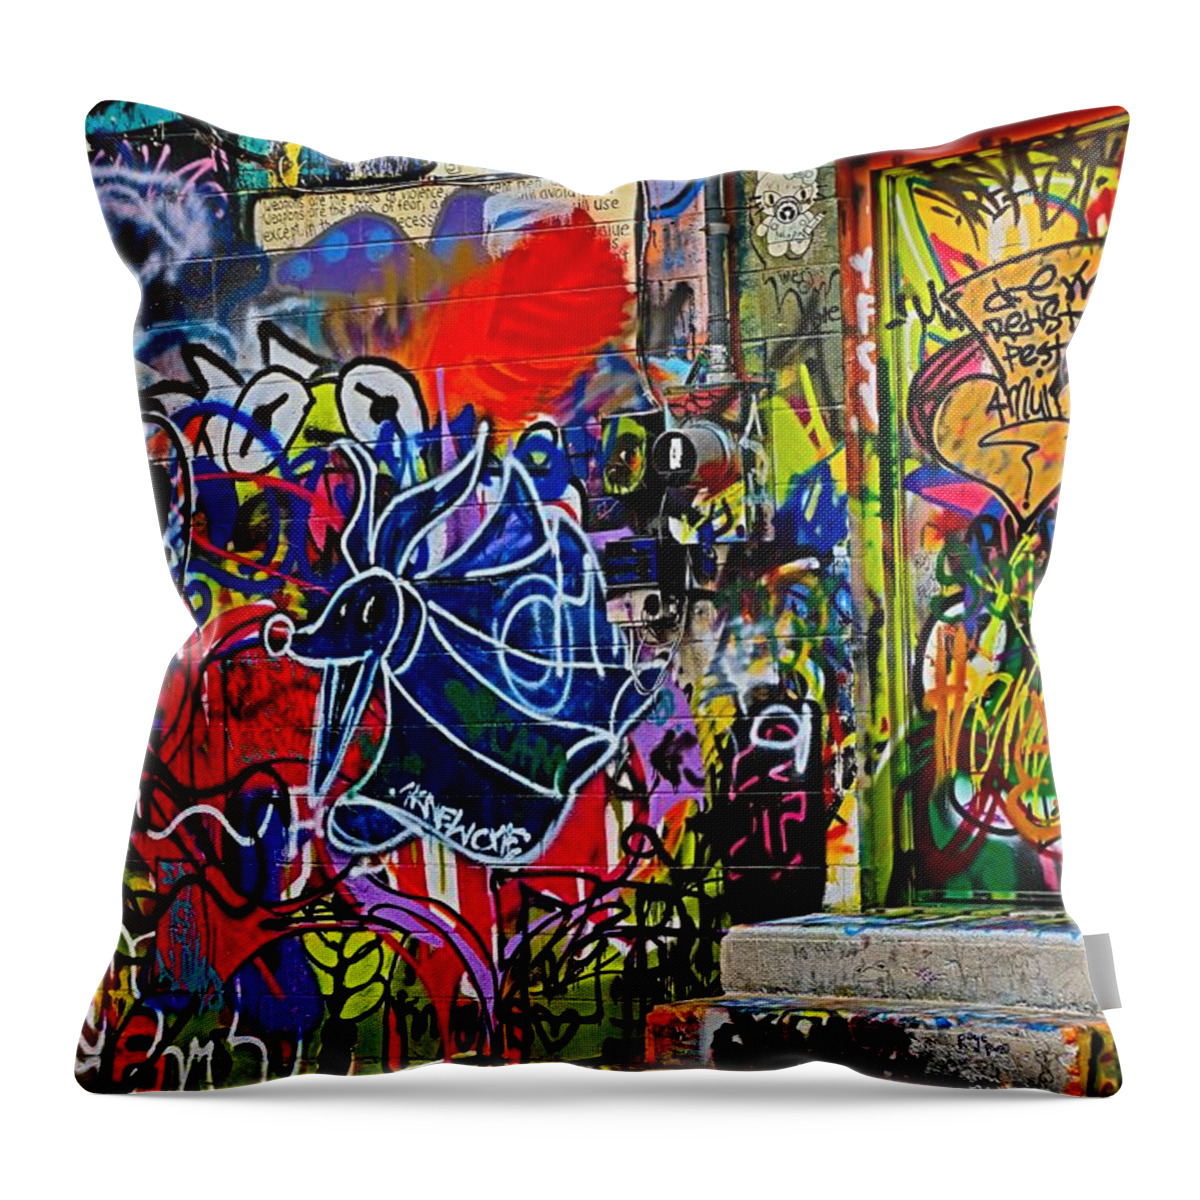 Art Alley Throw Pillow featuring the photograph Art Alley Three by Donald J Gray